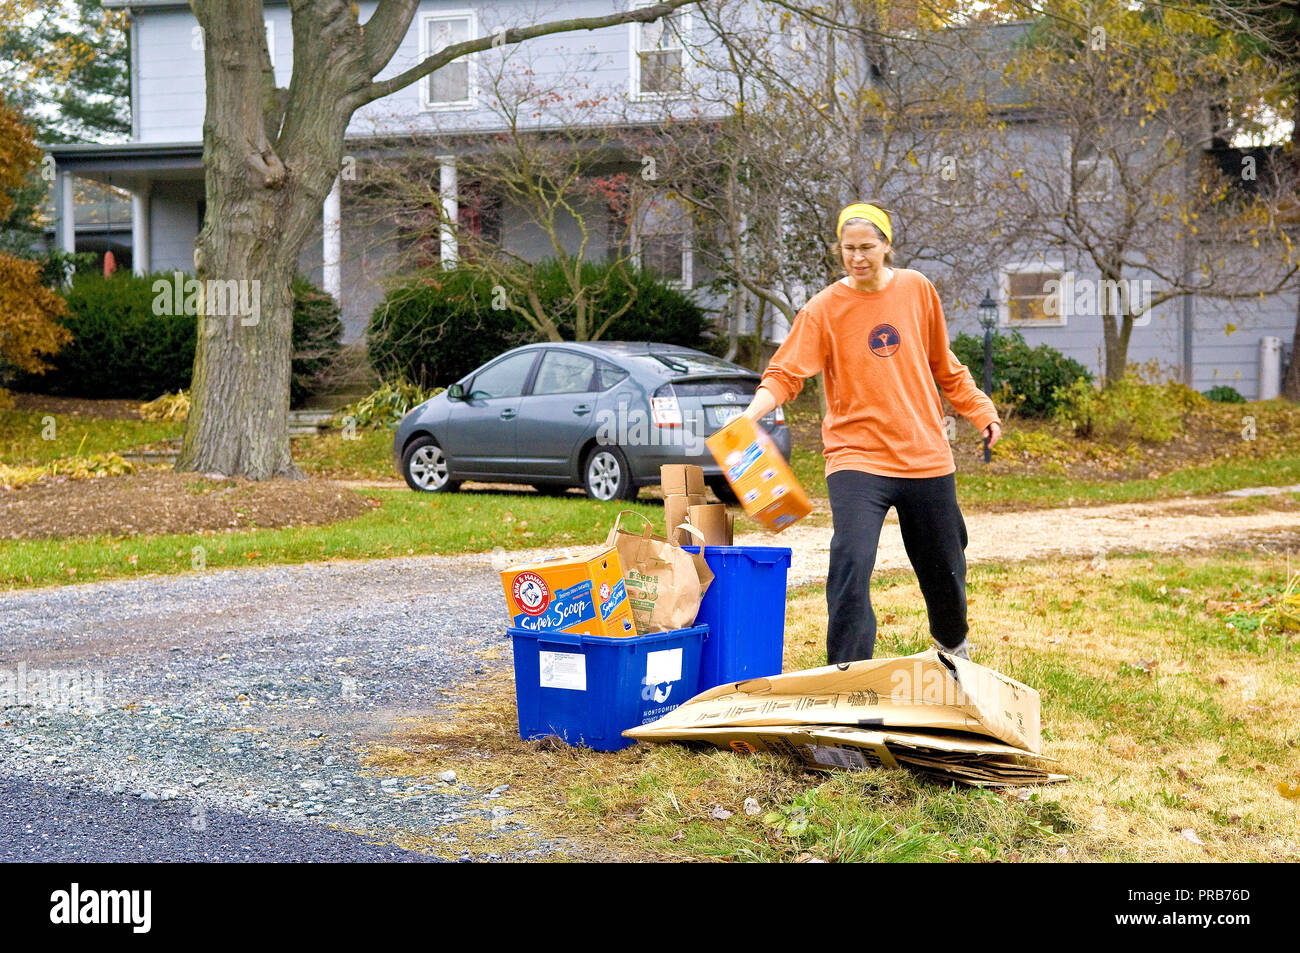 2007 - Woman taking trash out to a recycle bin along the street in front of her home. Stock Photo